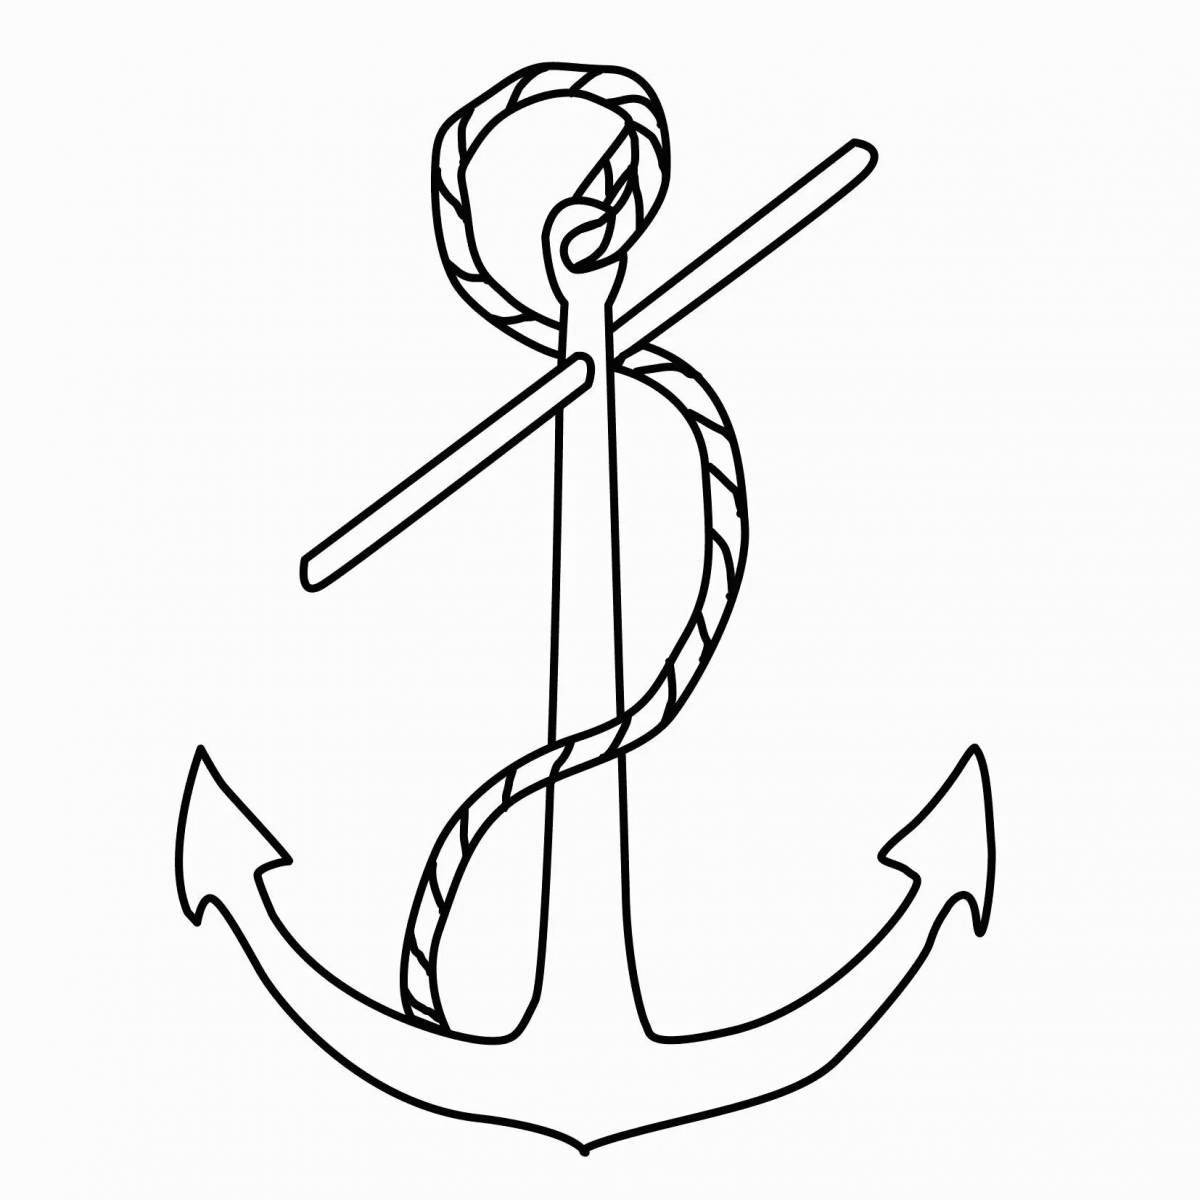 Coloring anchors for kids